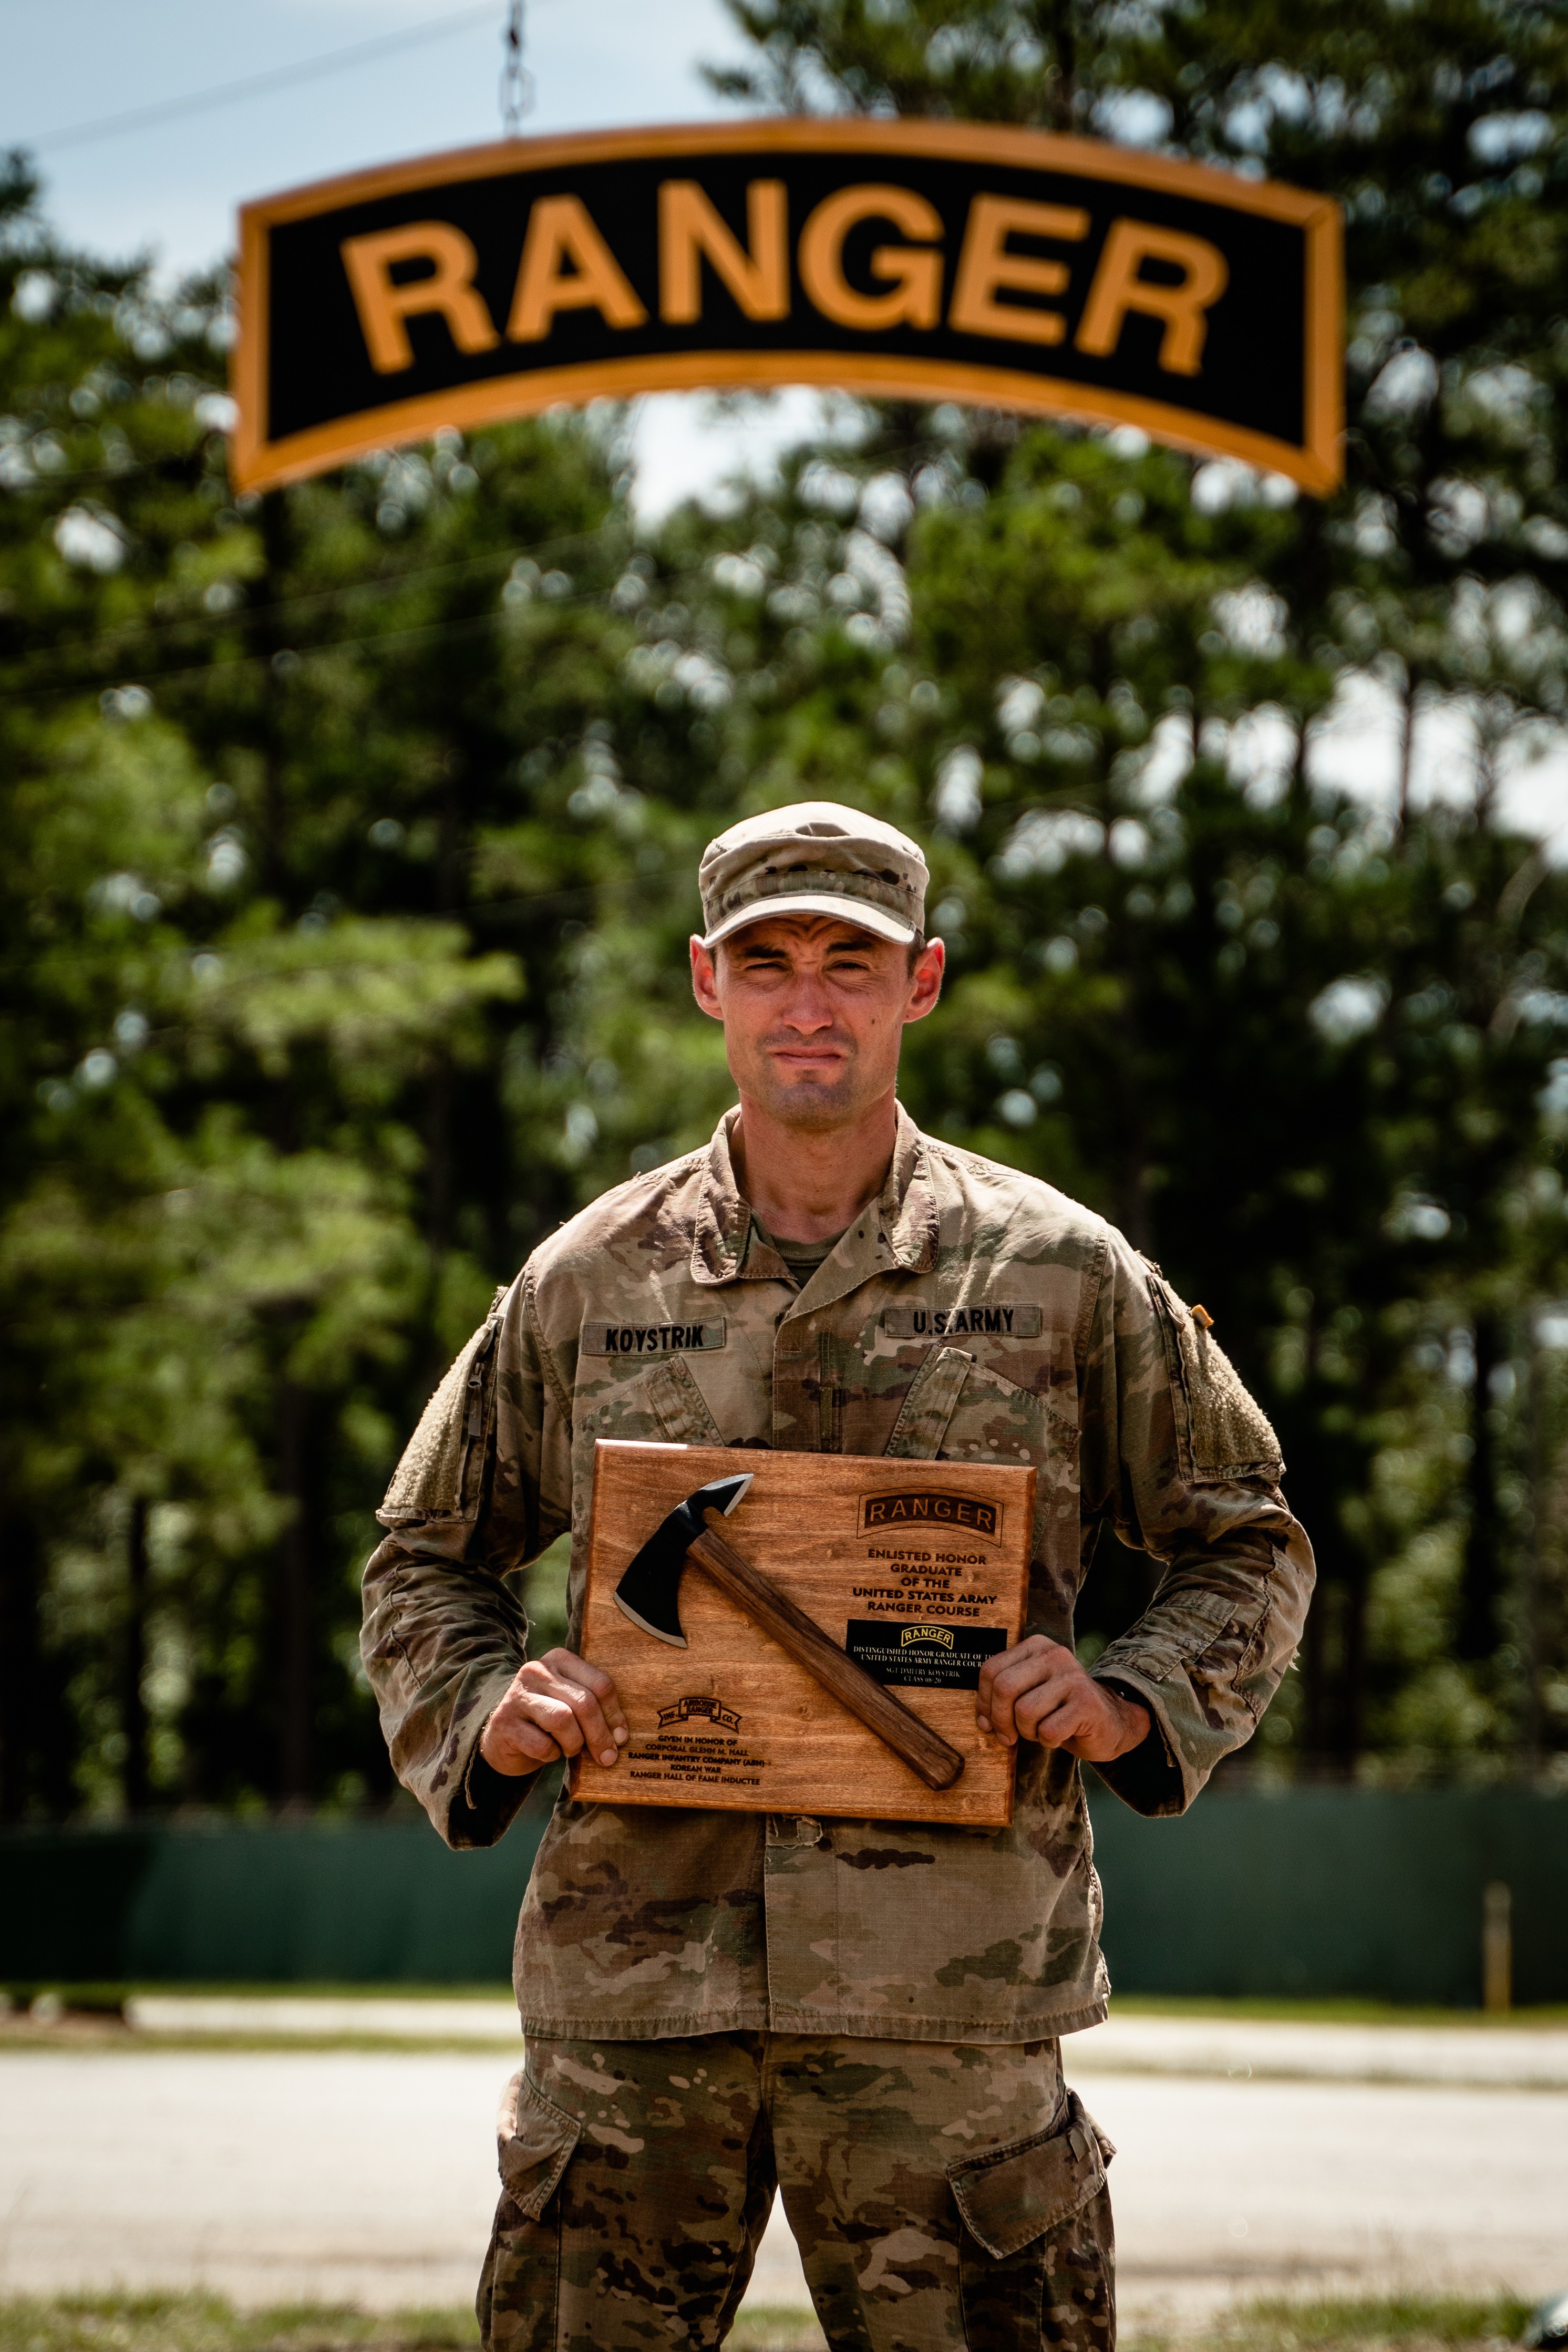 All American Paratroopers exemplify excellence in Army Leadership